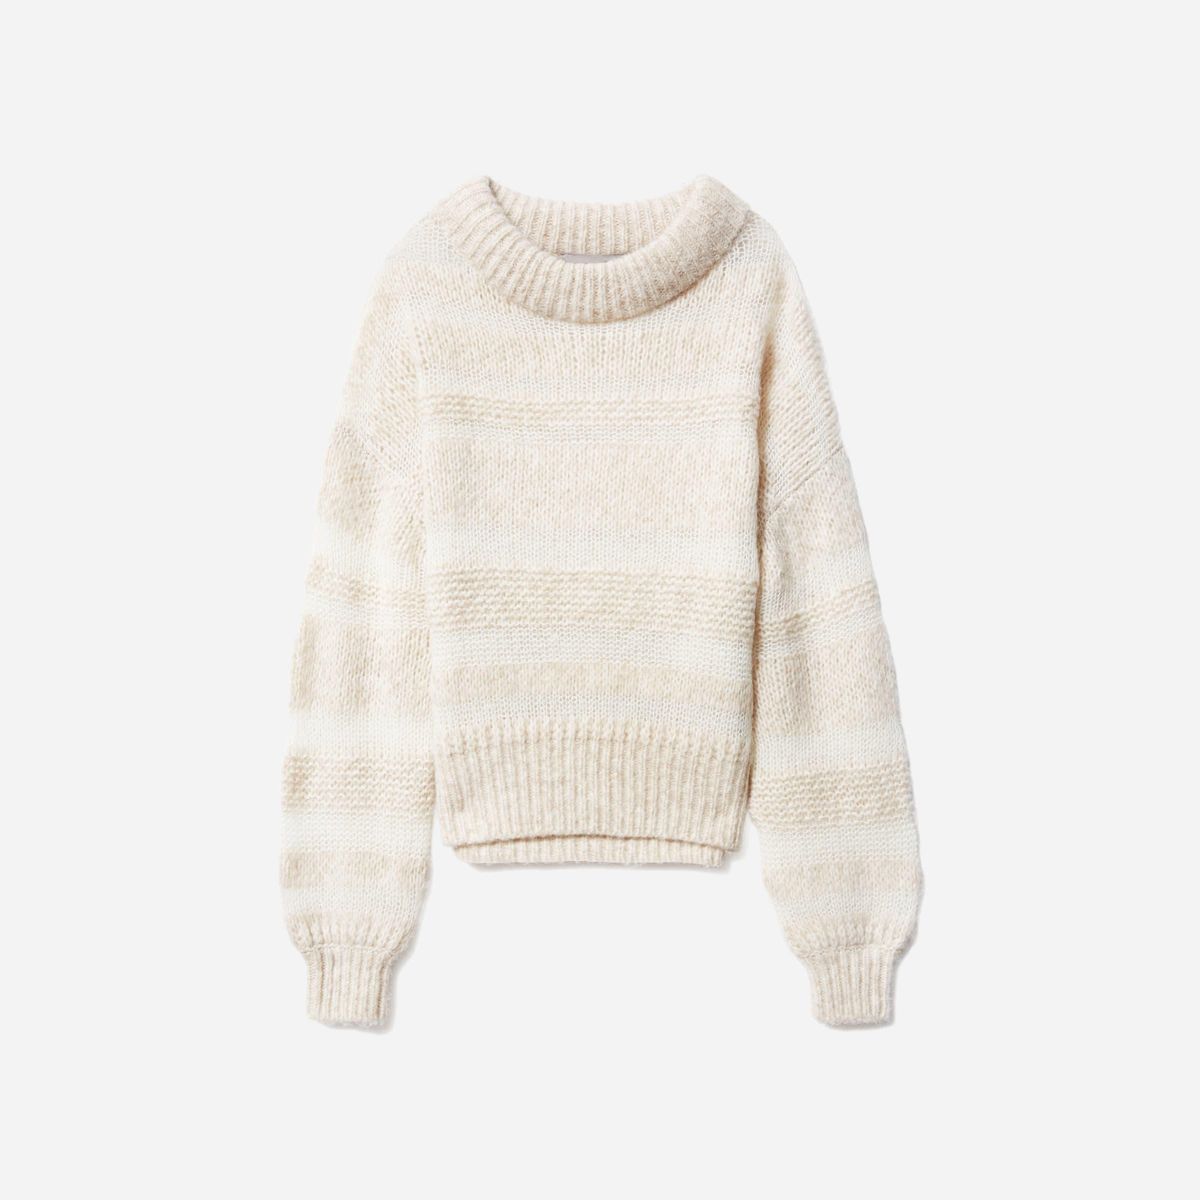 The Puff Sweater in Heathered Oat